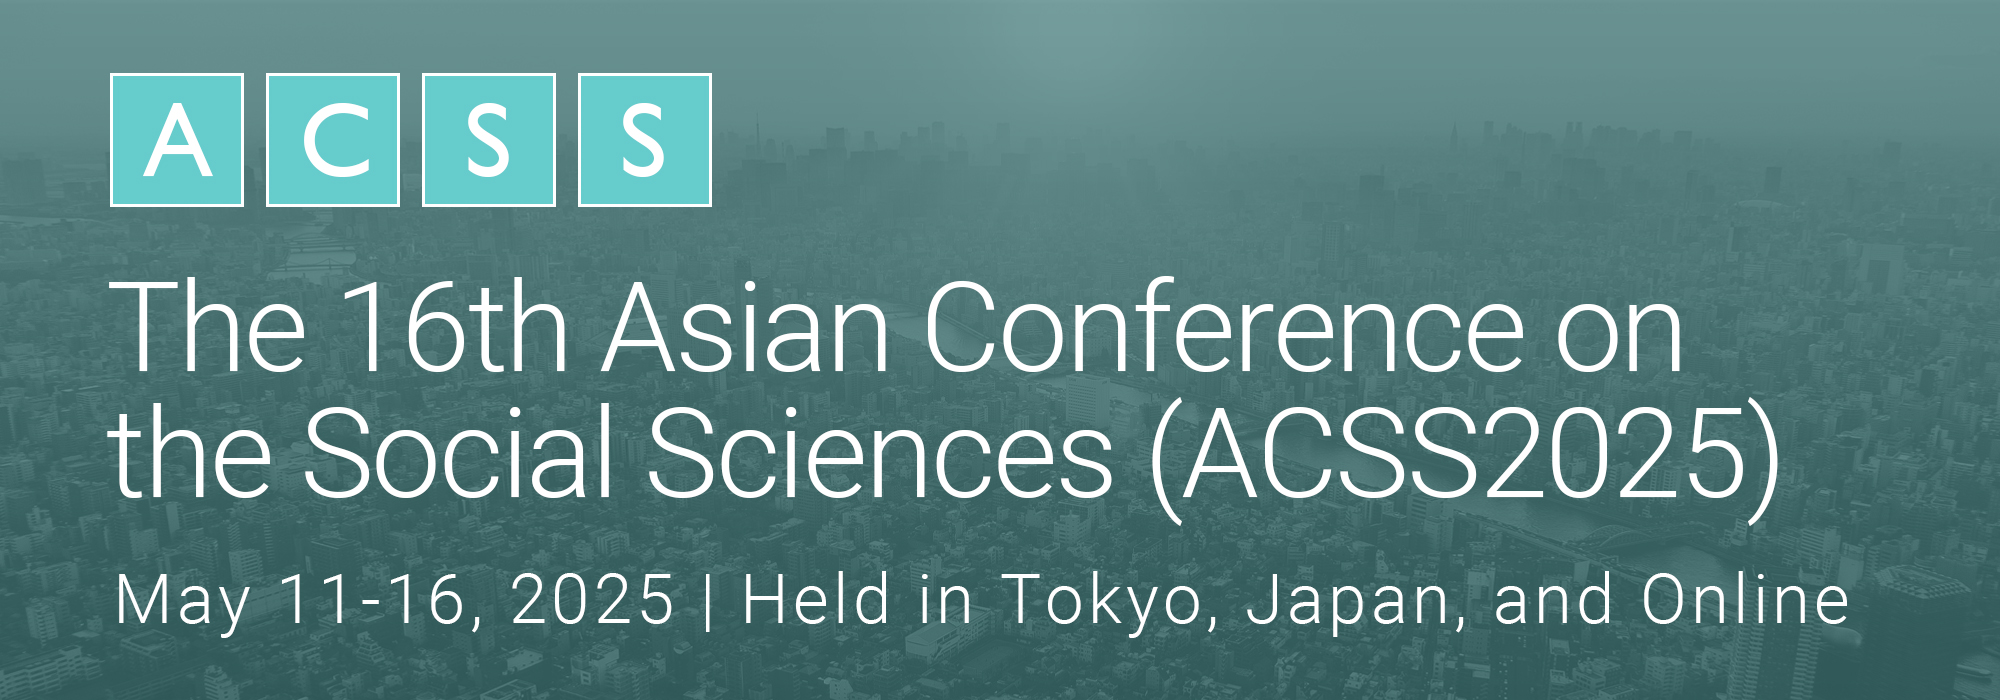 The Asian Conference on the Social Sciences (ACSS)